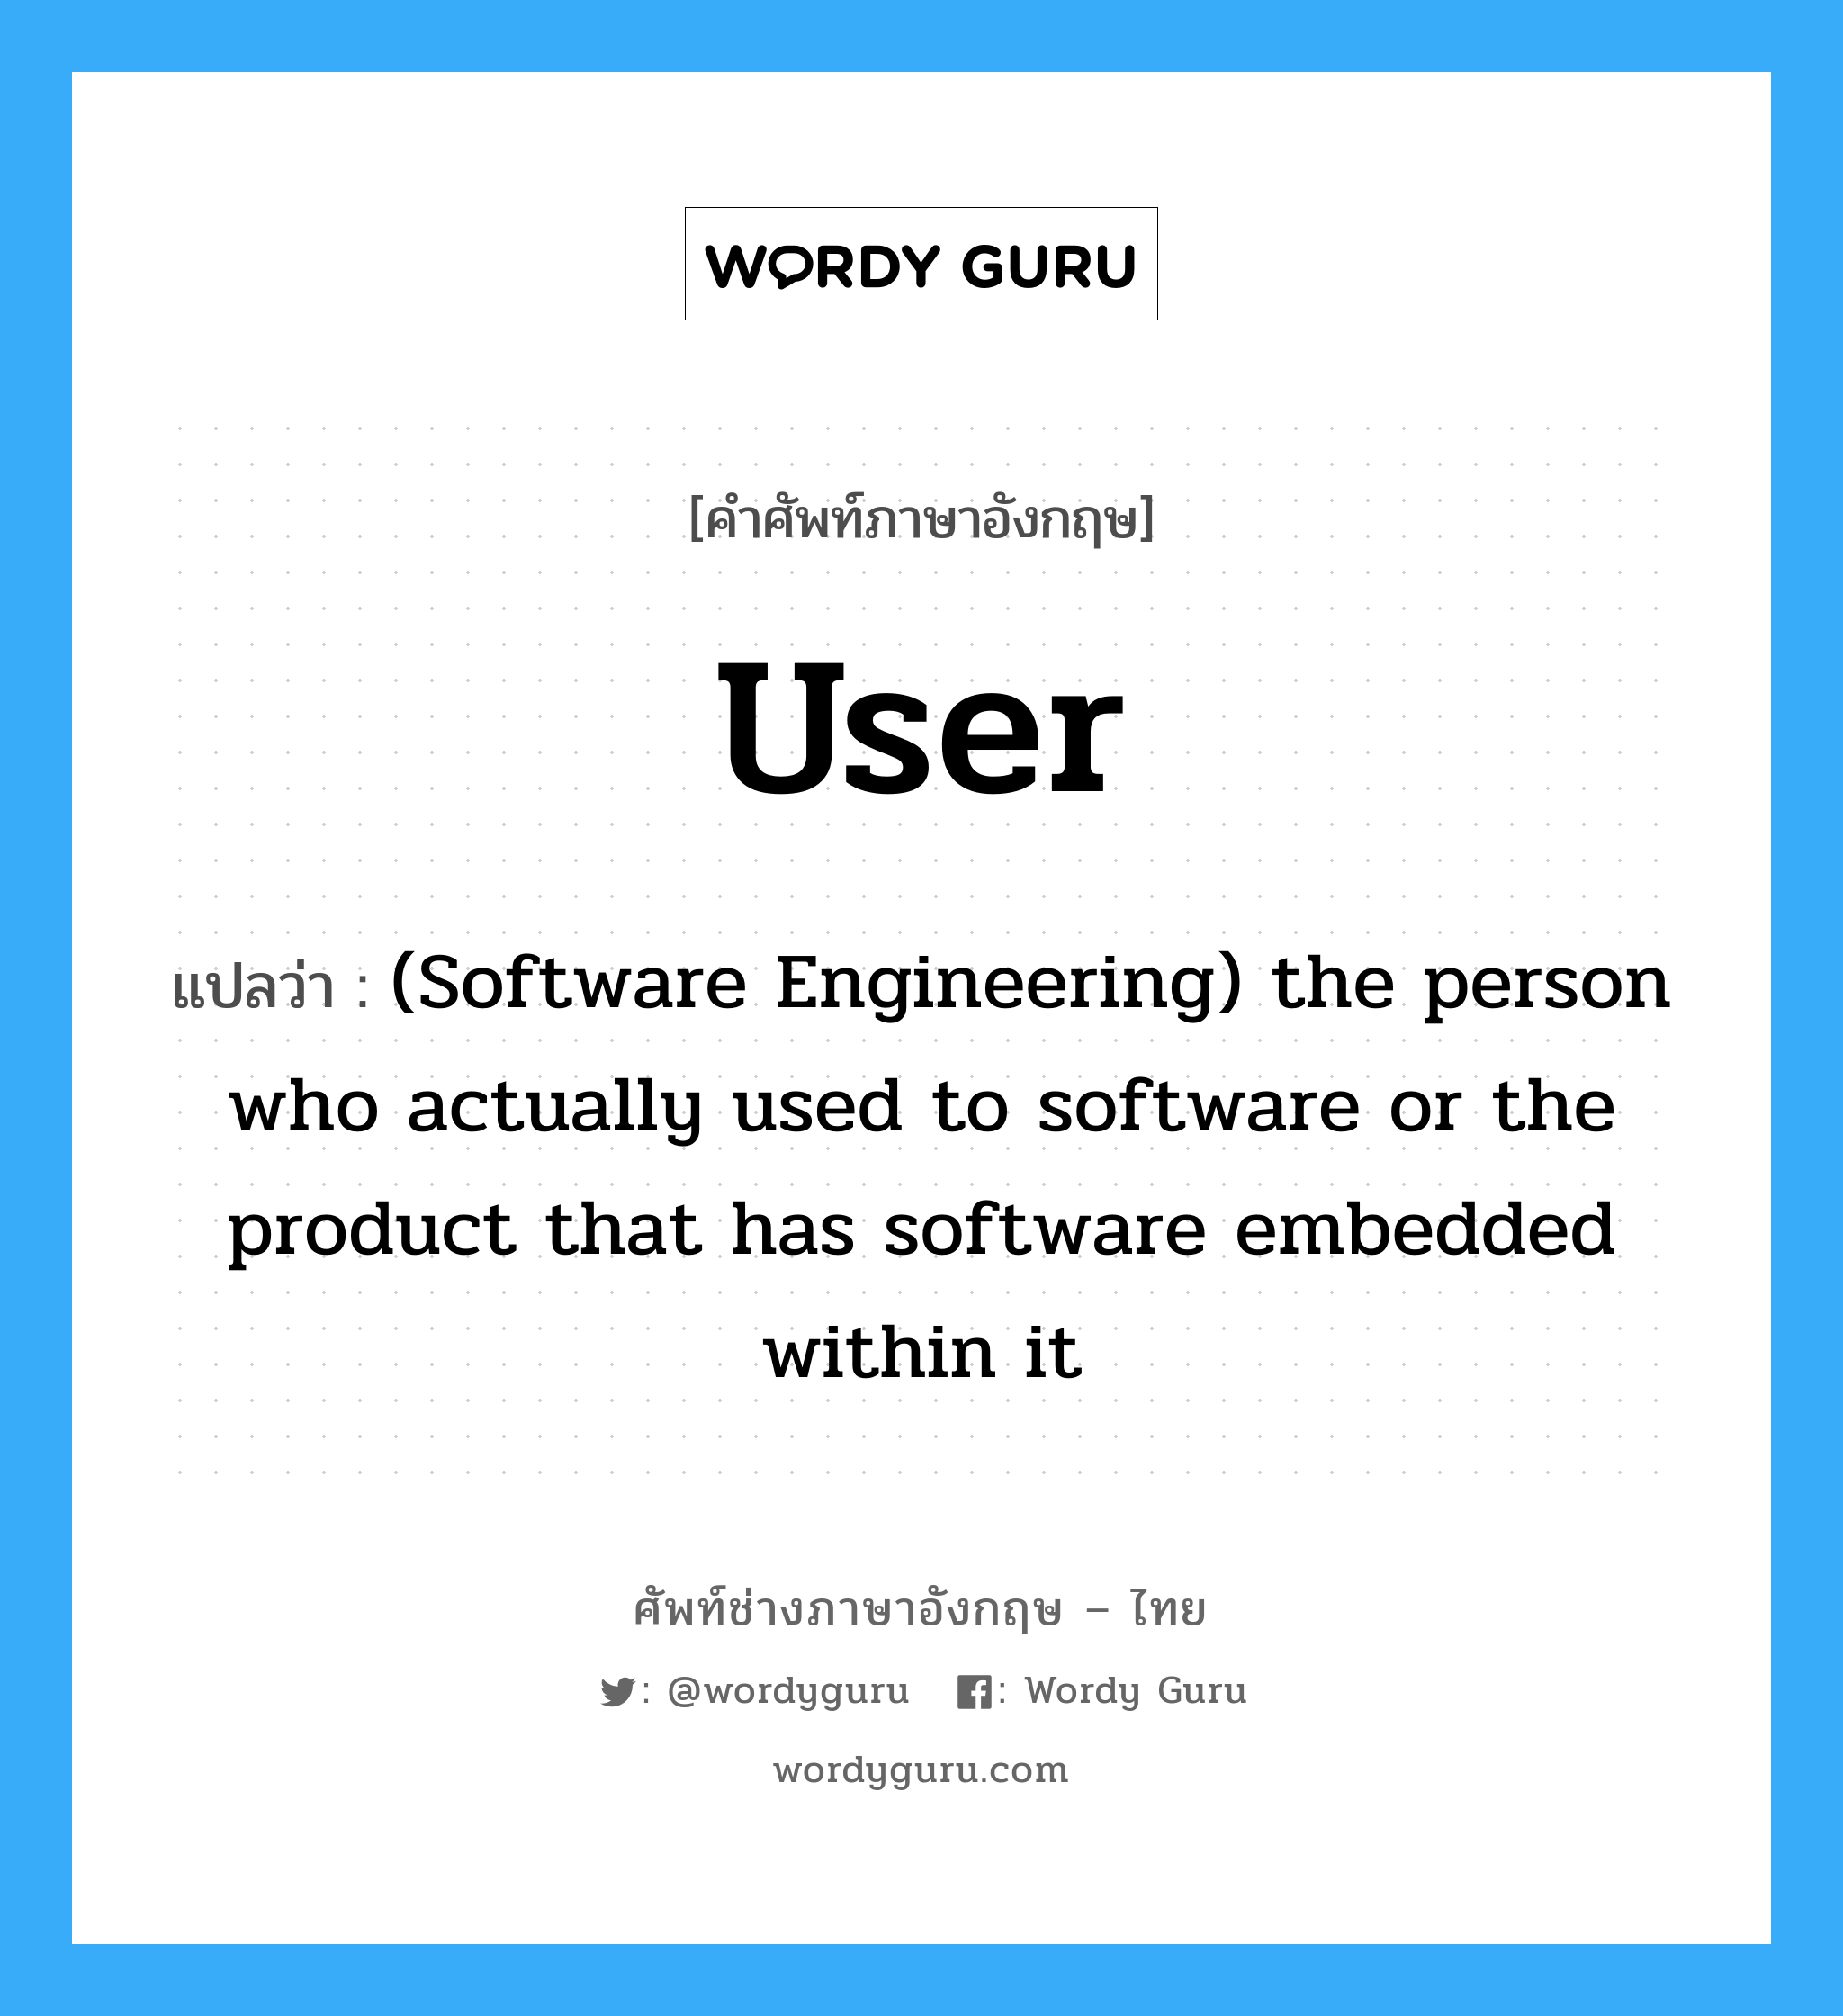 (Software Engineering) the person who actually used to software or the product that has software embedded within it ภาษาอังกฤษ?, คำศัพท์ช่างภาษาอังกฤษ - ไทย (Software Engineering) the person who actually used to software or the product that has software embedded within it คำศัพท์ภาษาอังกฤษ (Software Engineering) the person who actually used to software or the product that has software embedded within it แปลว่า User